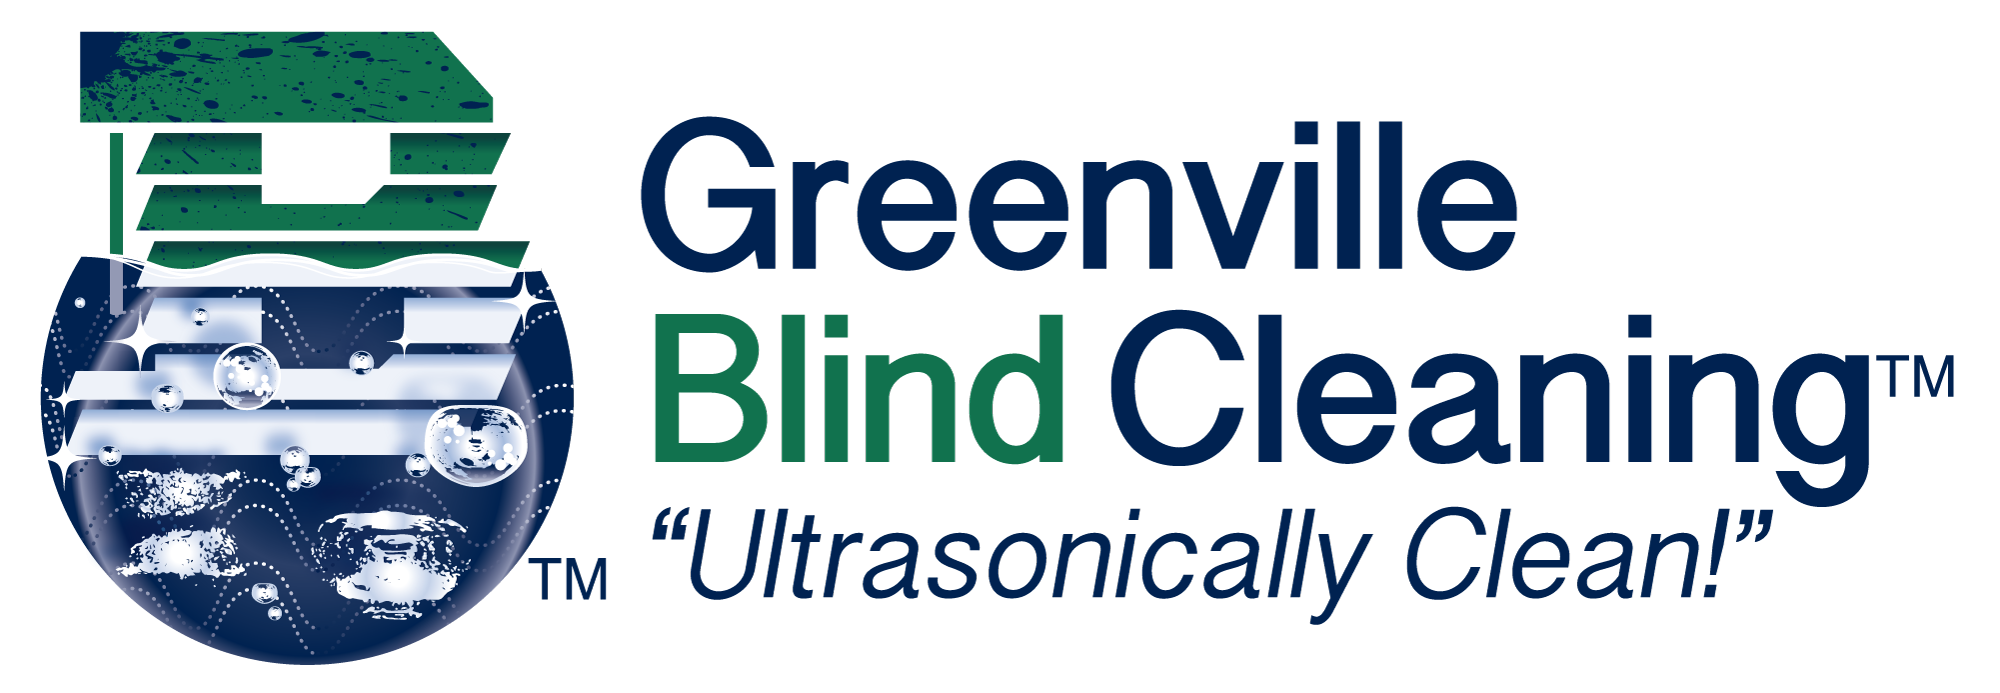 Greenville Blind Cleaning